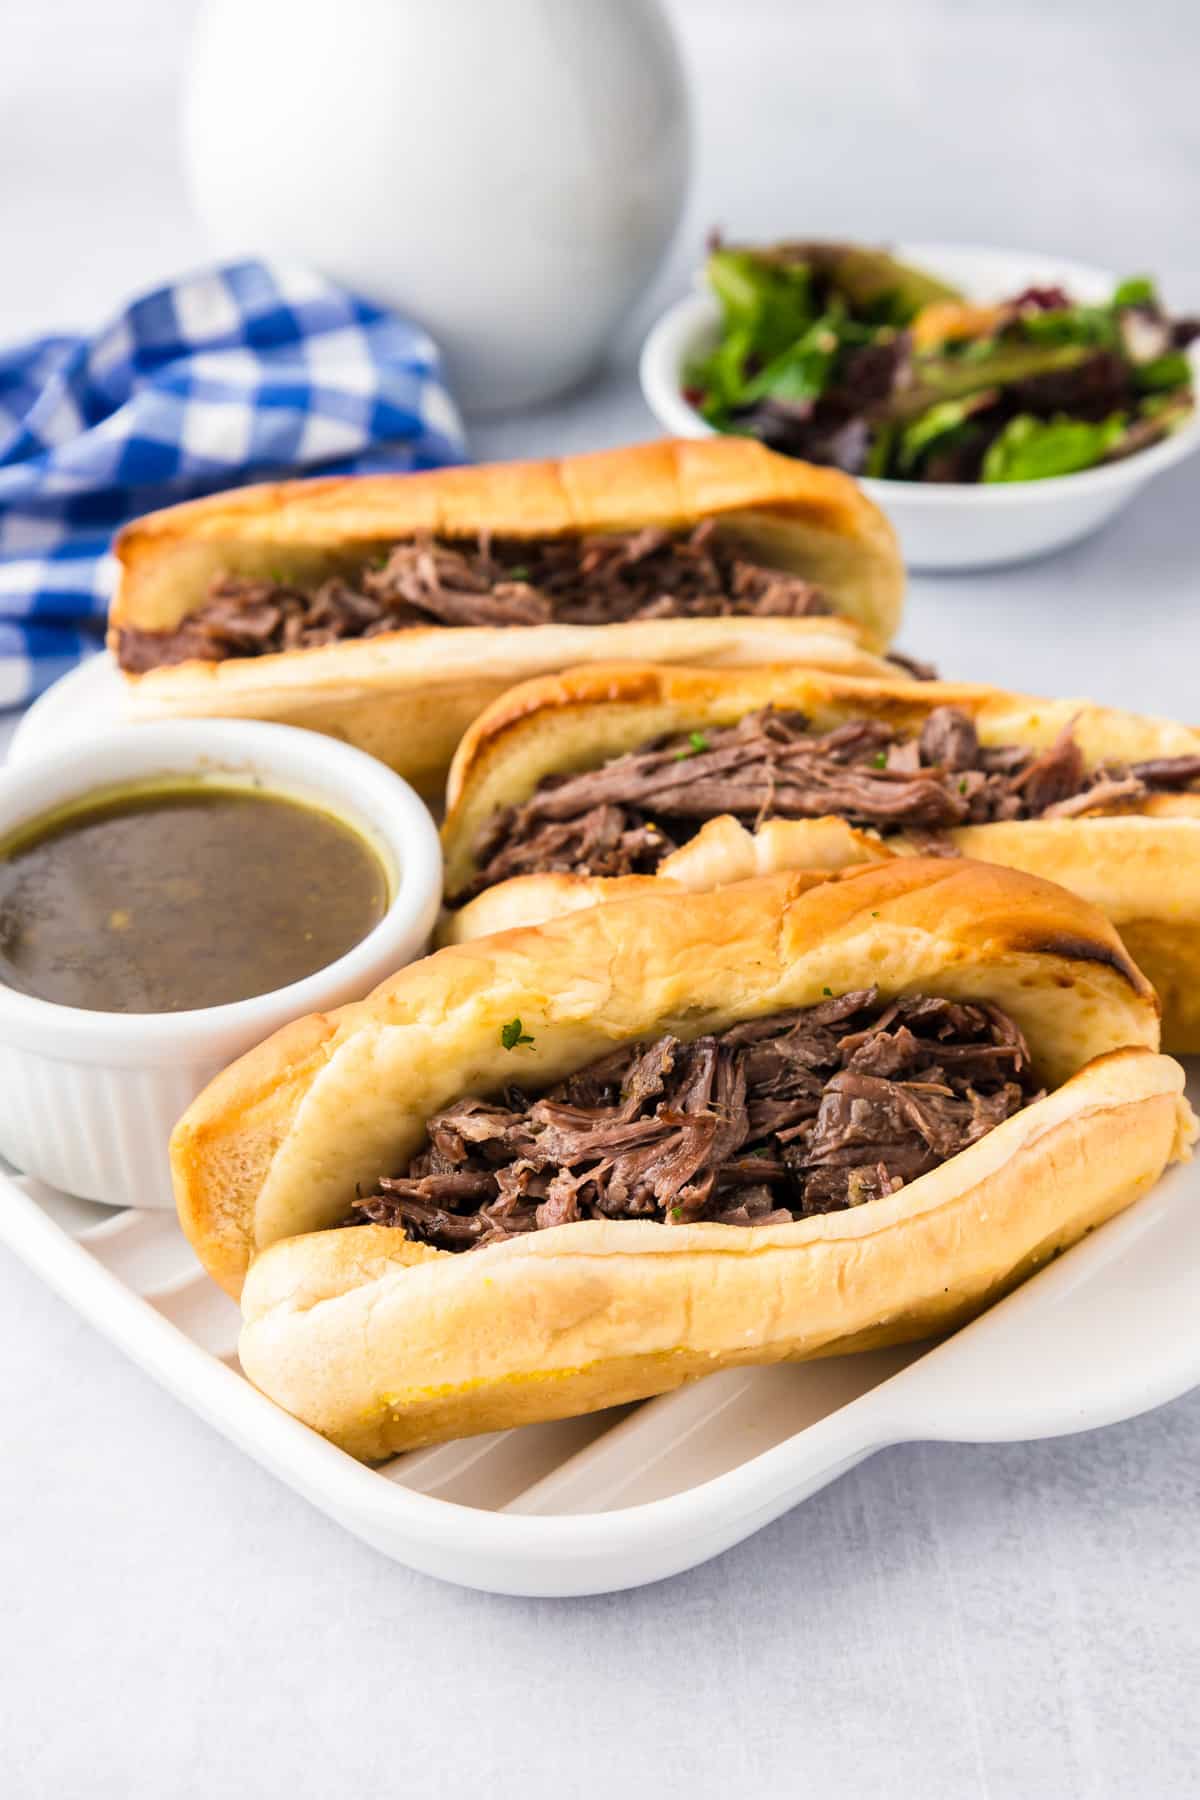 A plater with three french dip sandwiches and a bowl of aus jus sauce next to them.